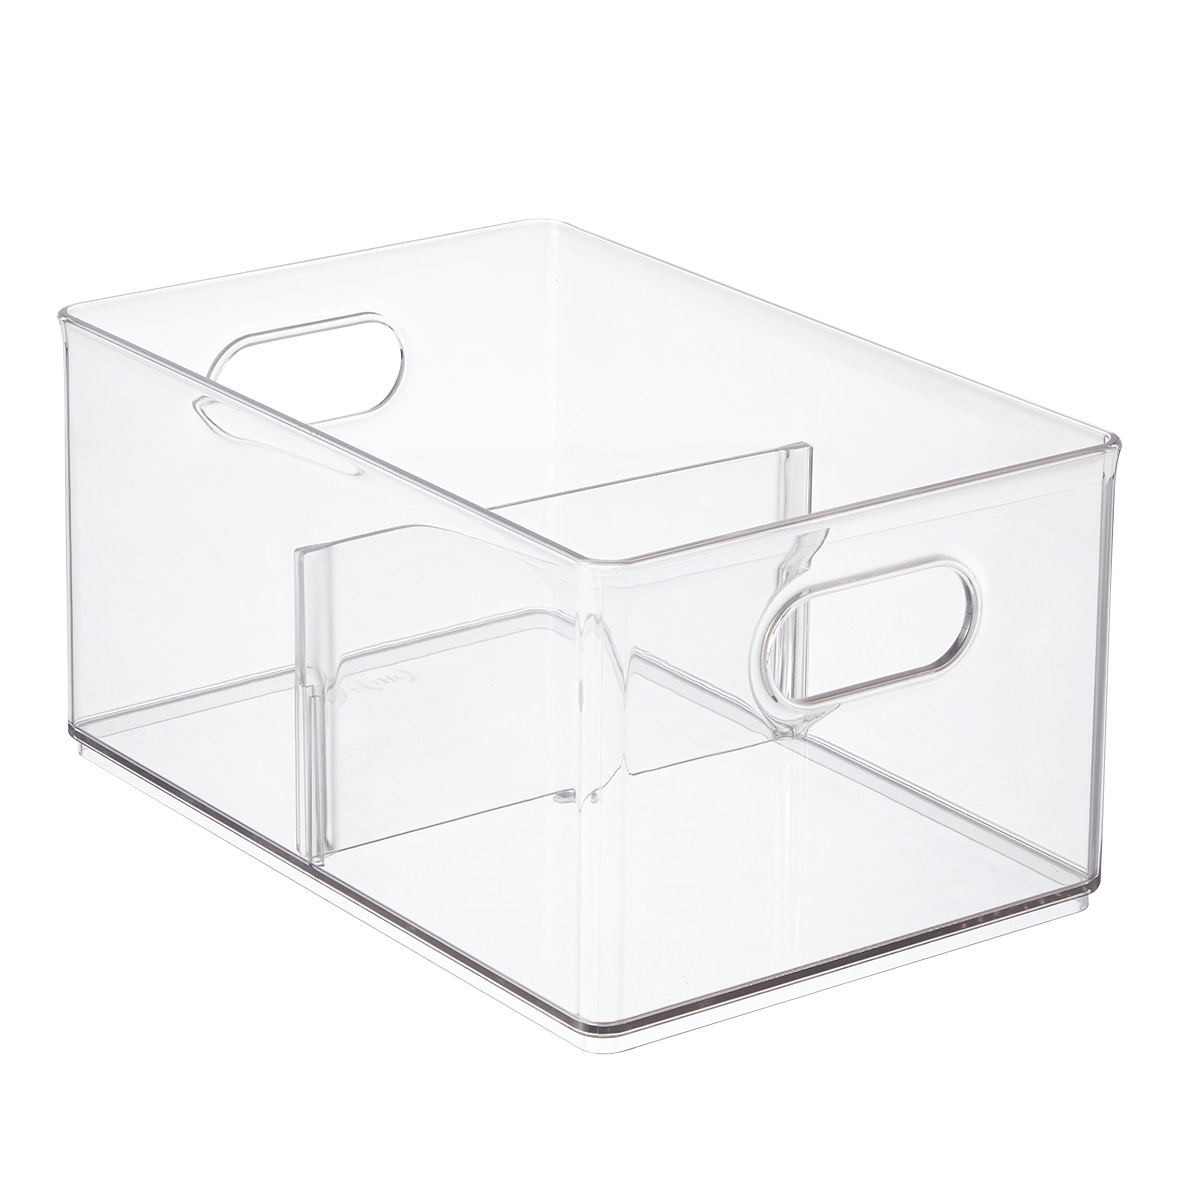 https://www.containerstore.com/catalogimages/387545/10080429-THE-divided-freezer-bin.jpg